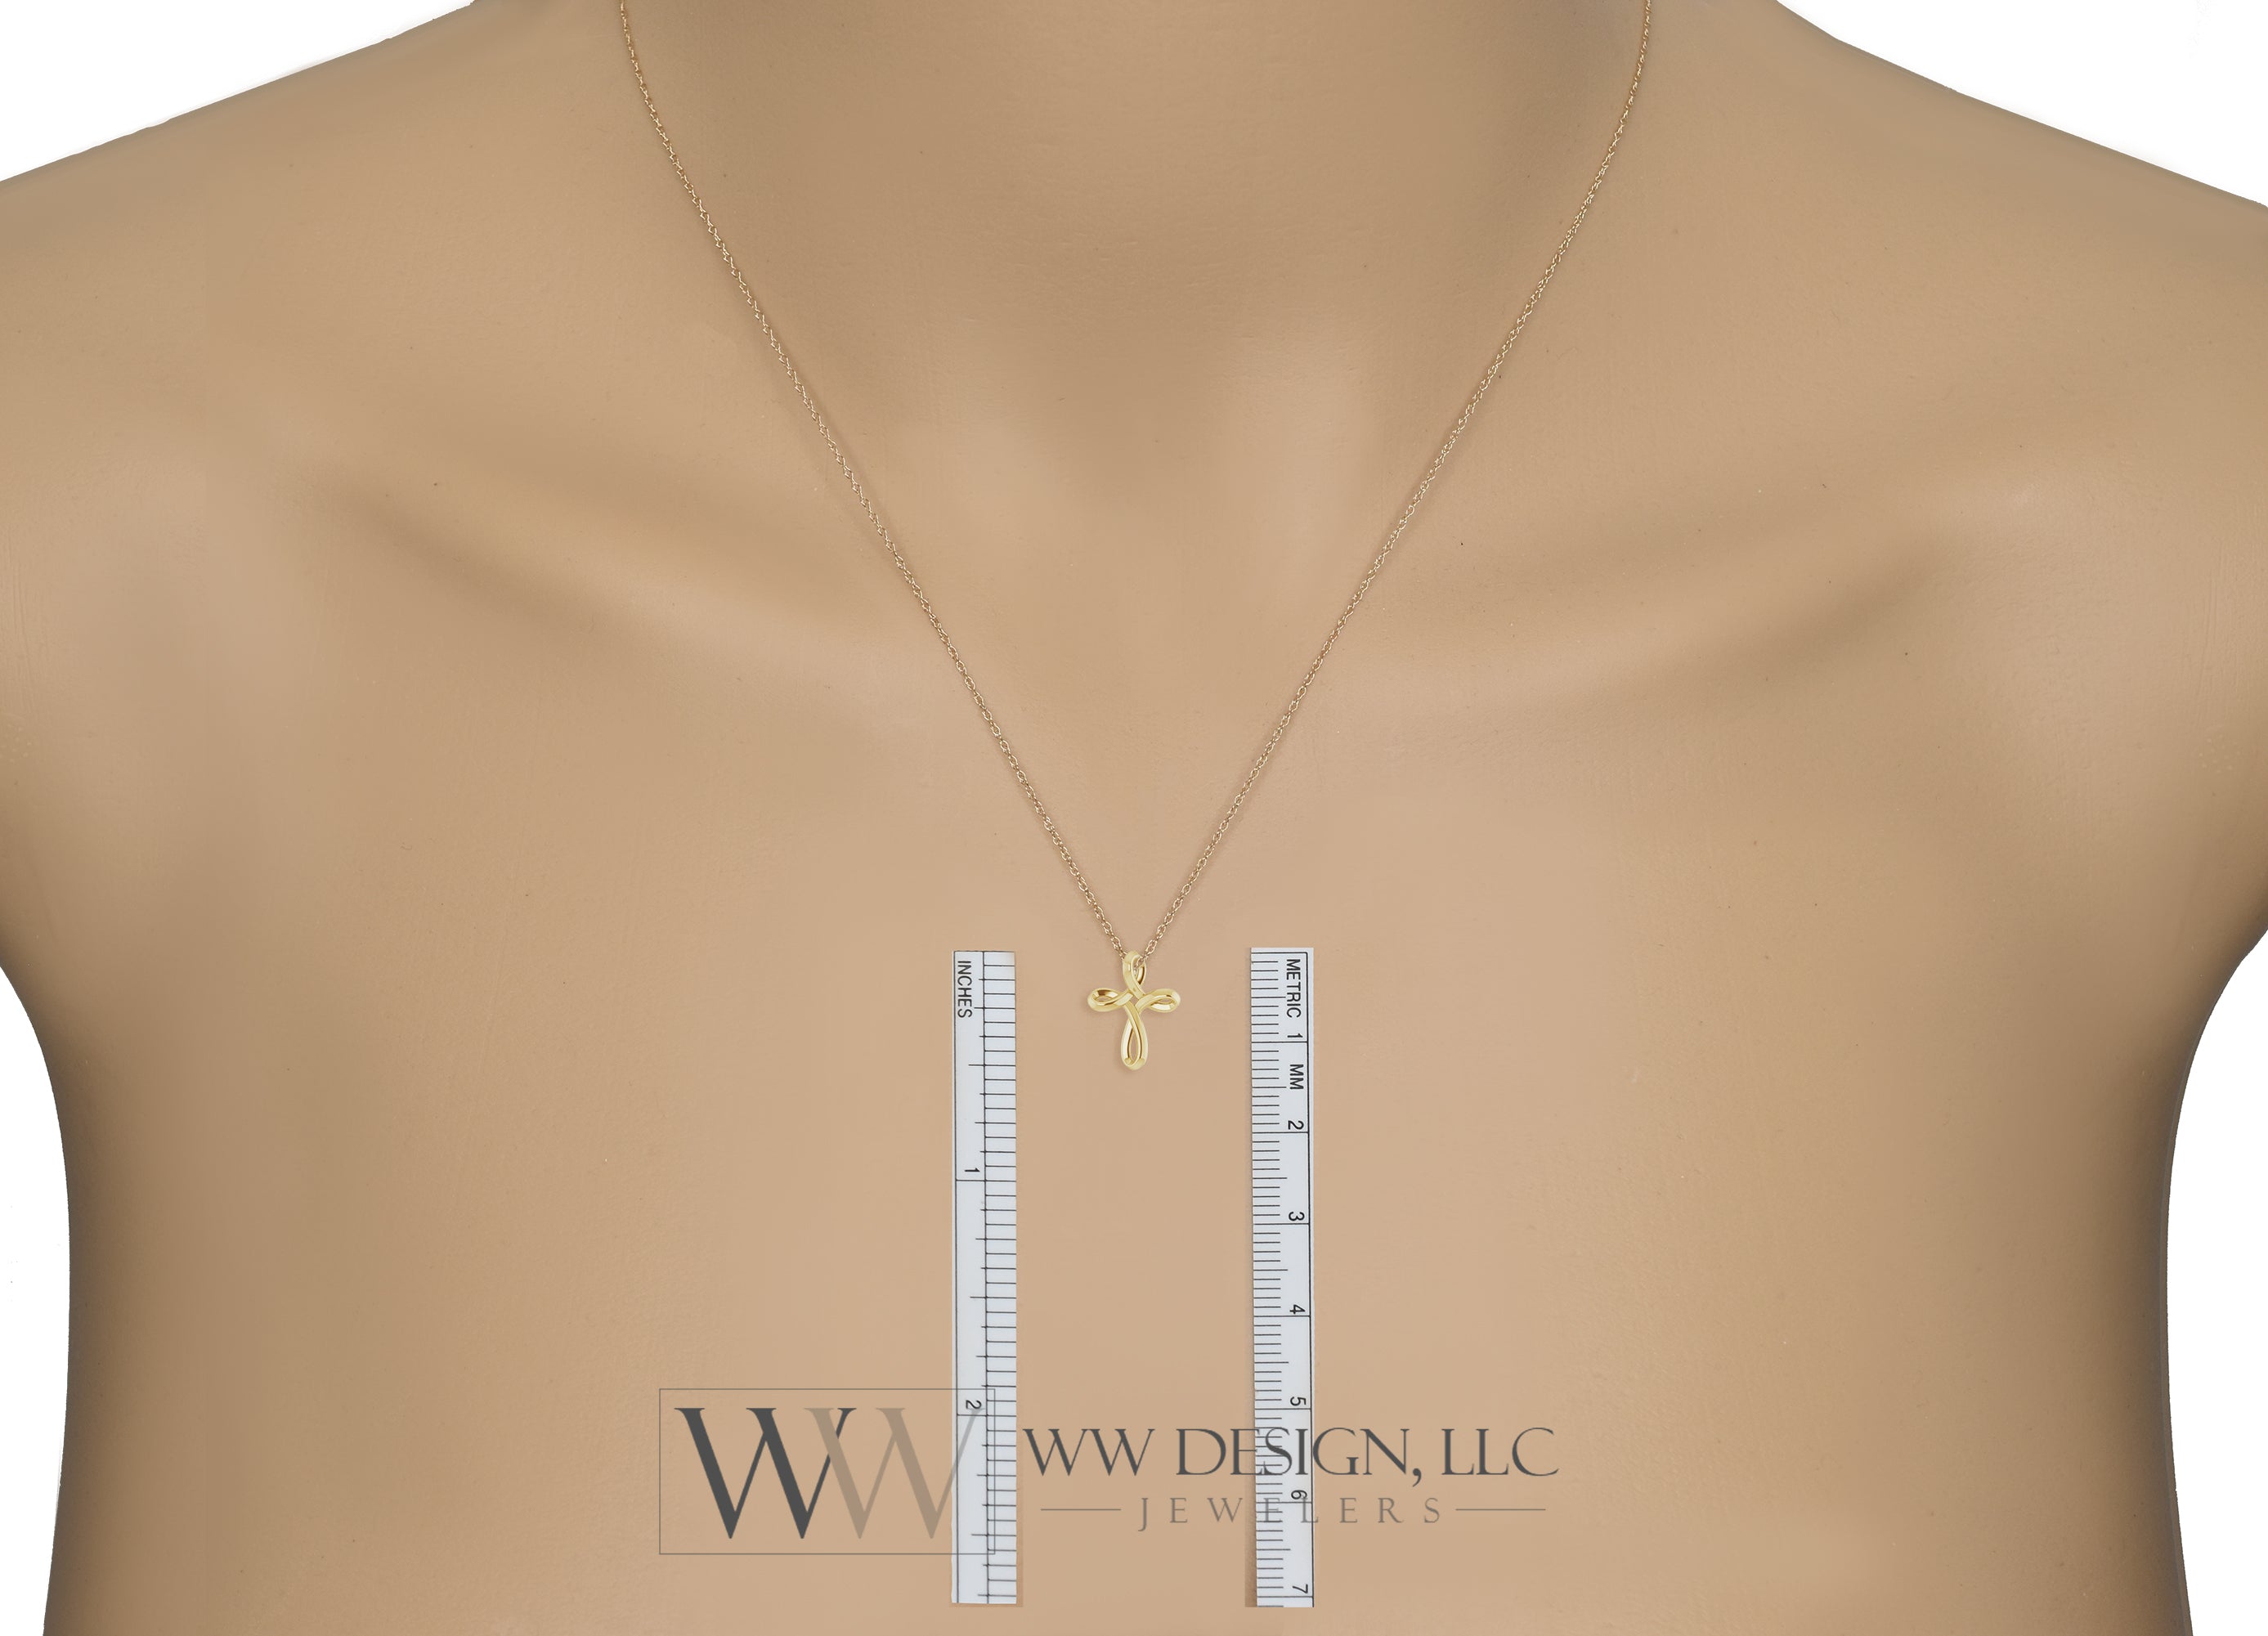 Minimalist CROSS Necklace - 14k SOLID Gold (Yellow, White, Rose), Platinum or Sterling Silver 13mmx10.5mm     WWDesignJewelers.com